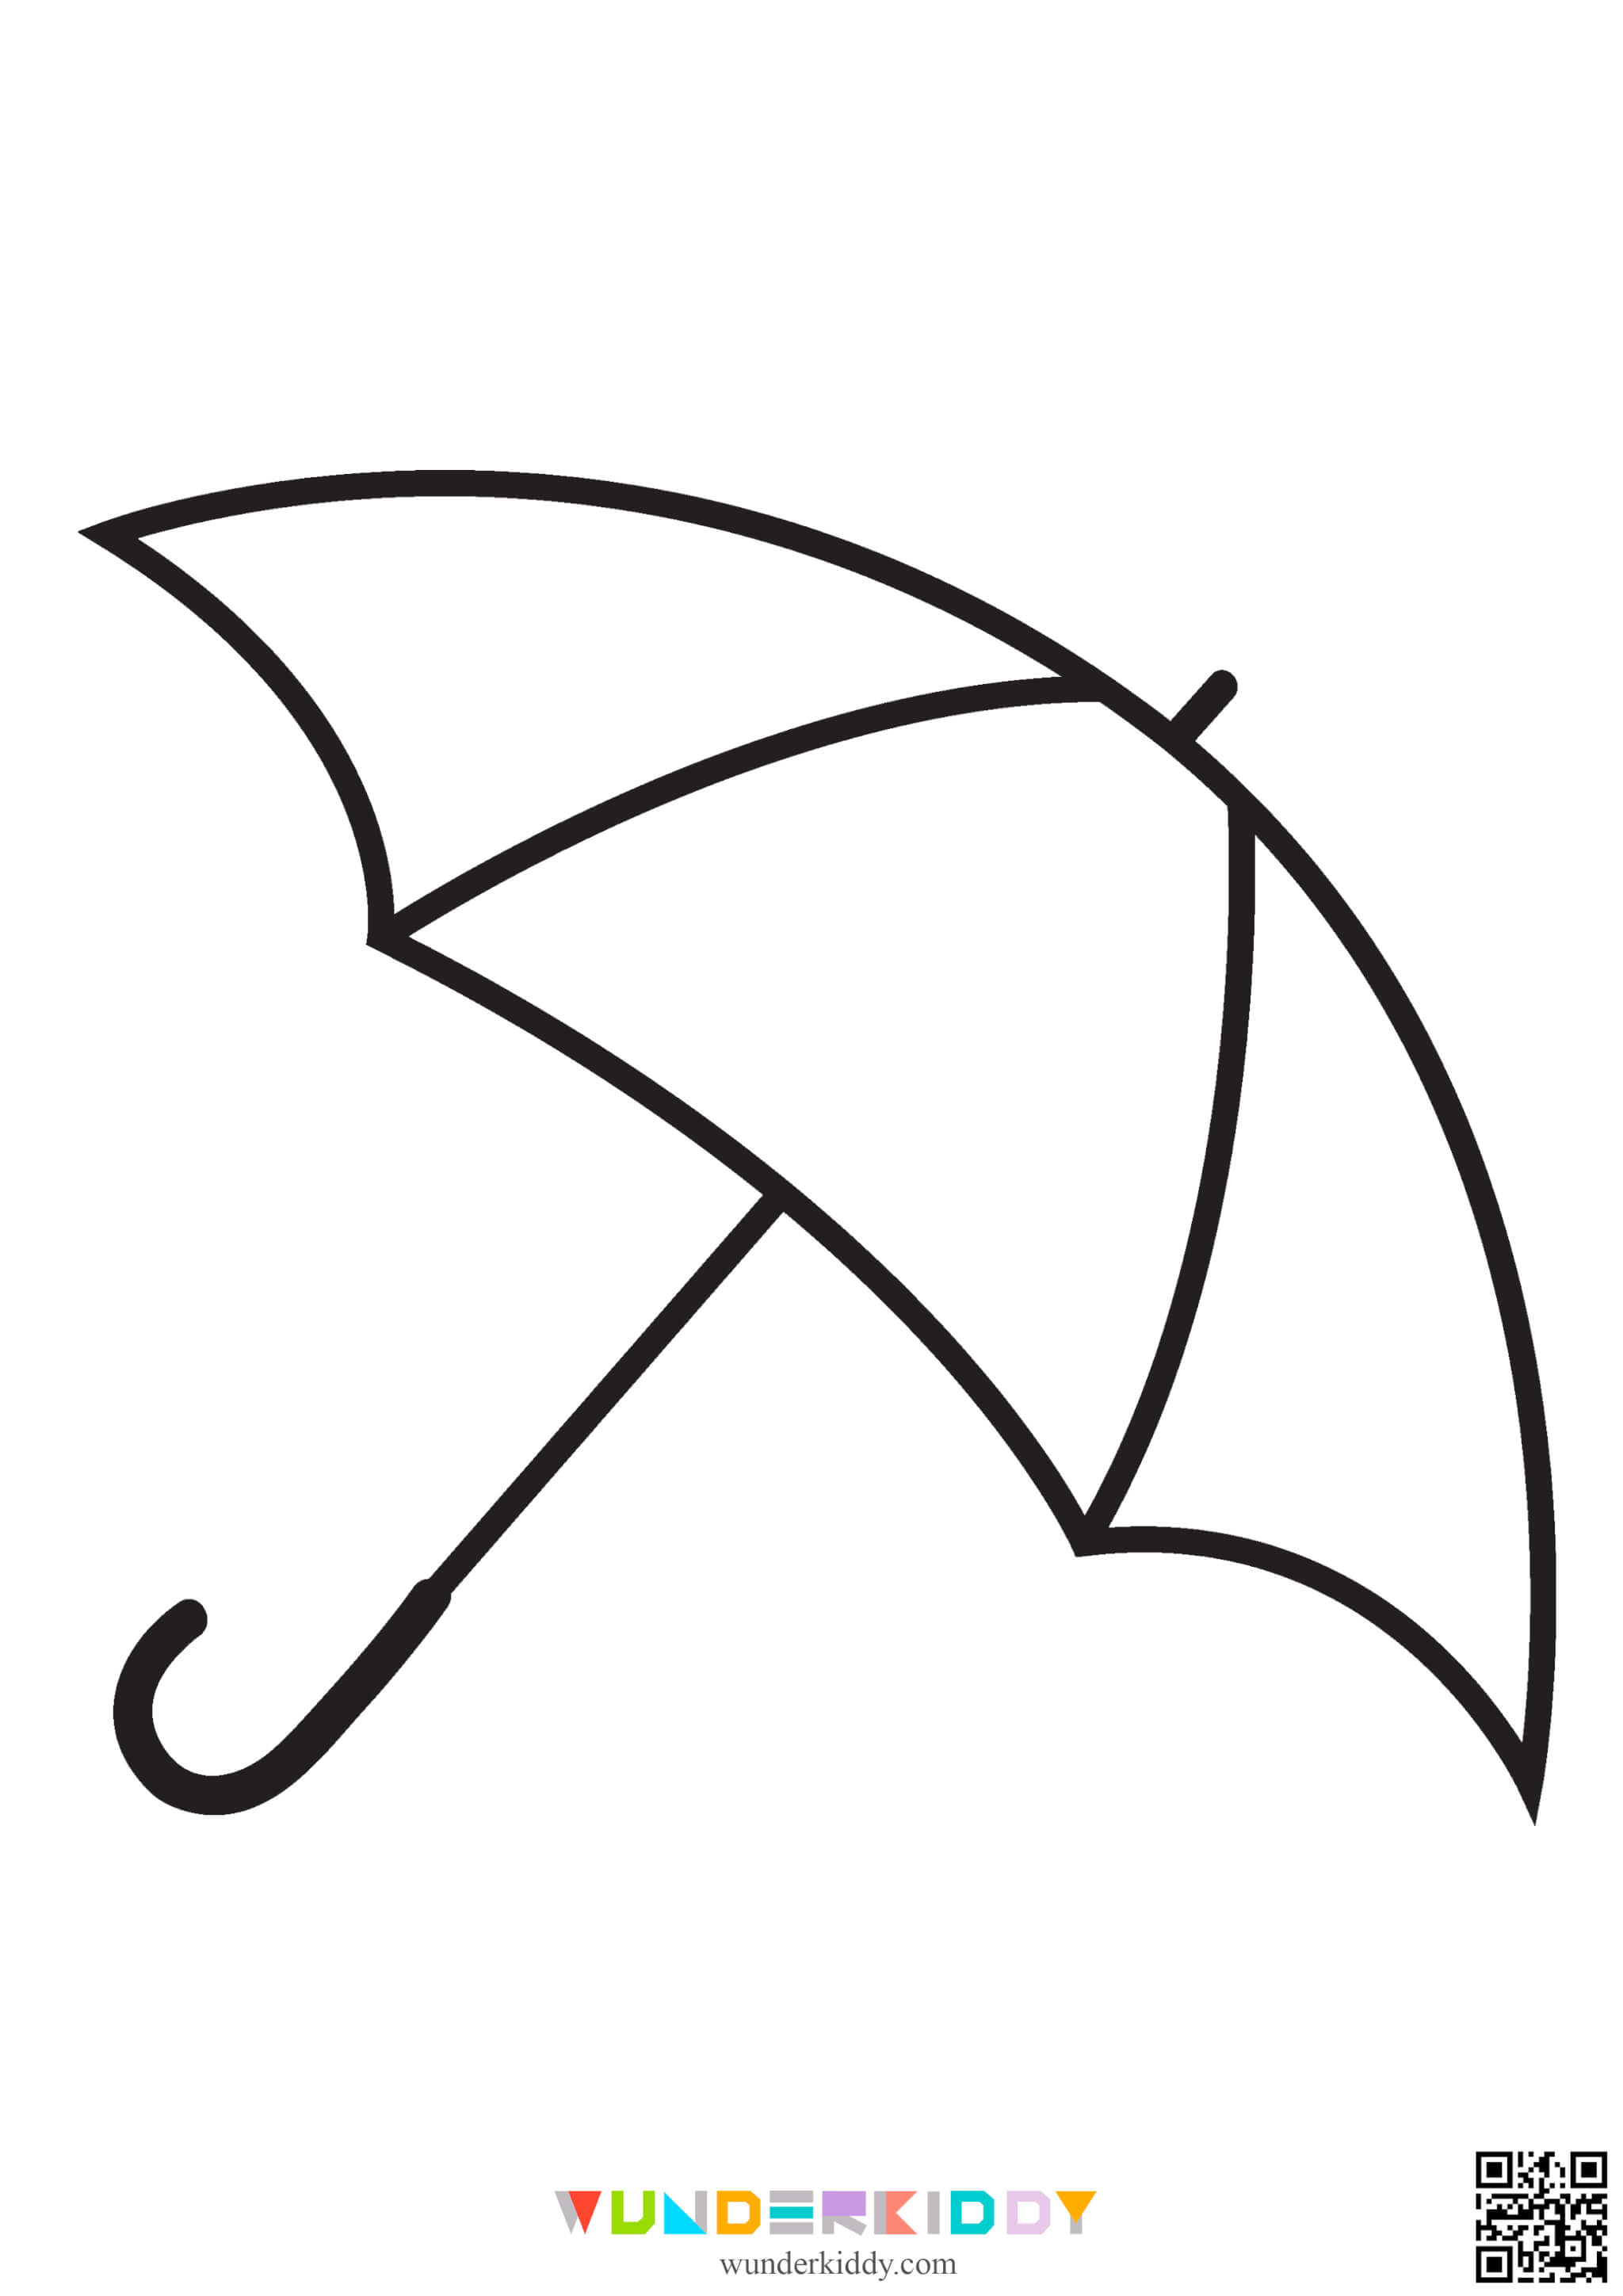 Umbrella Coloring Pages for Kids - Image 4